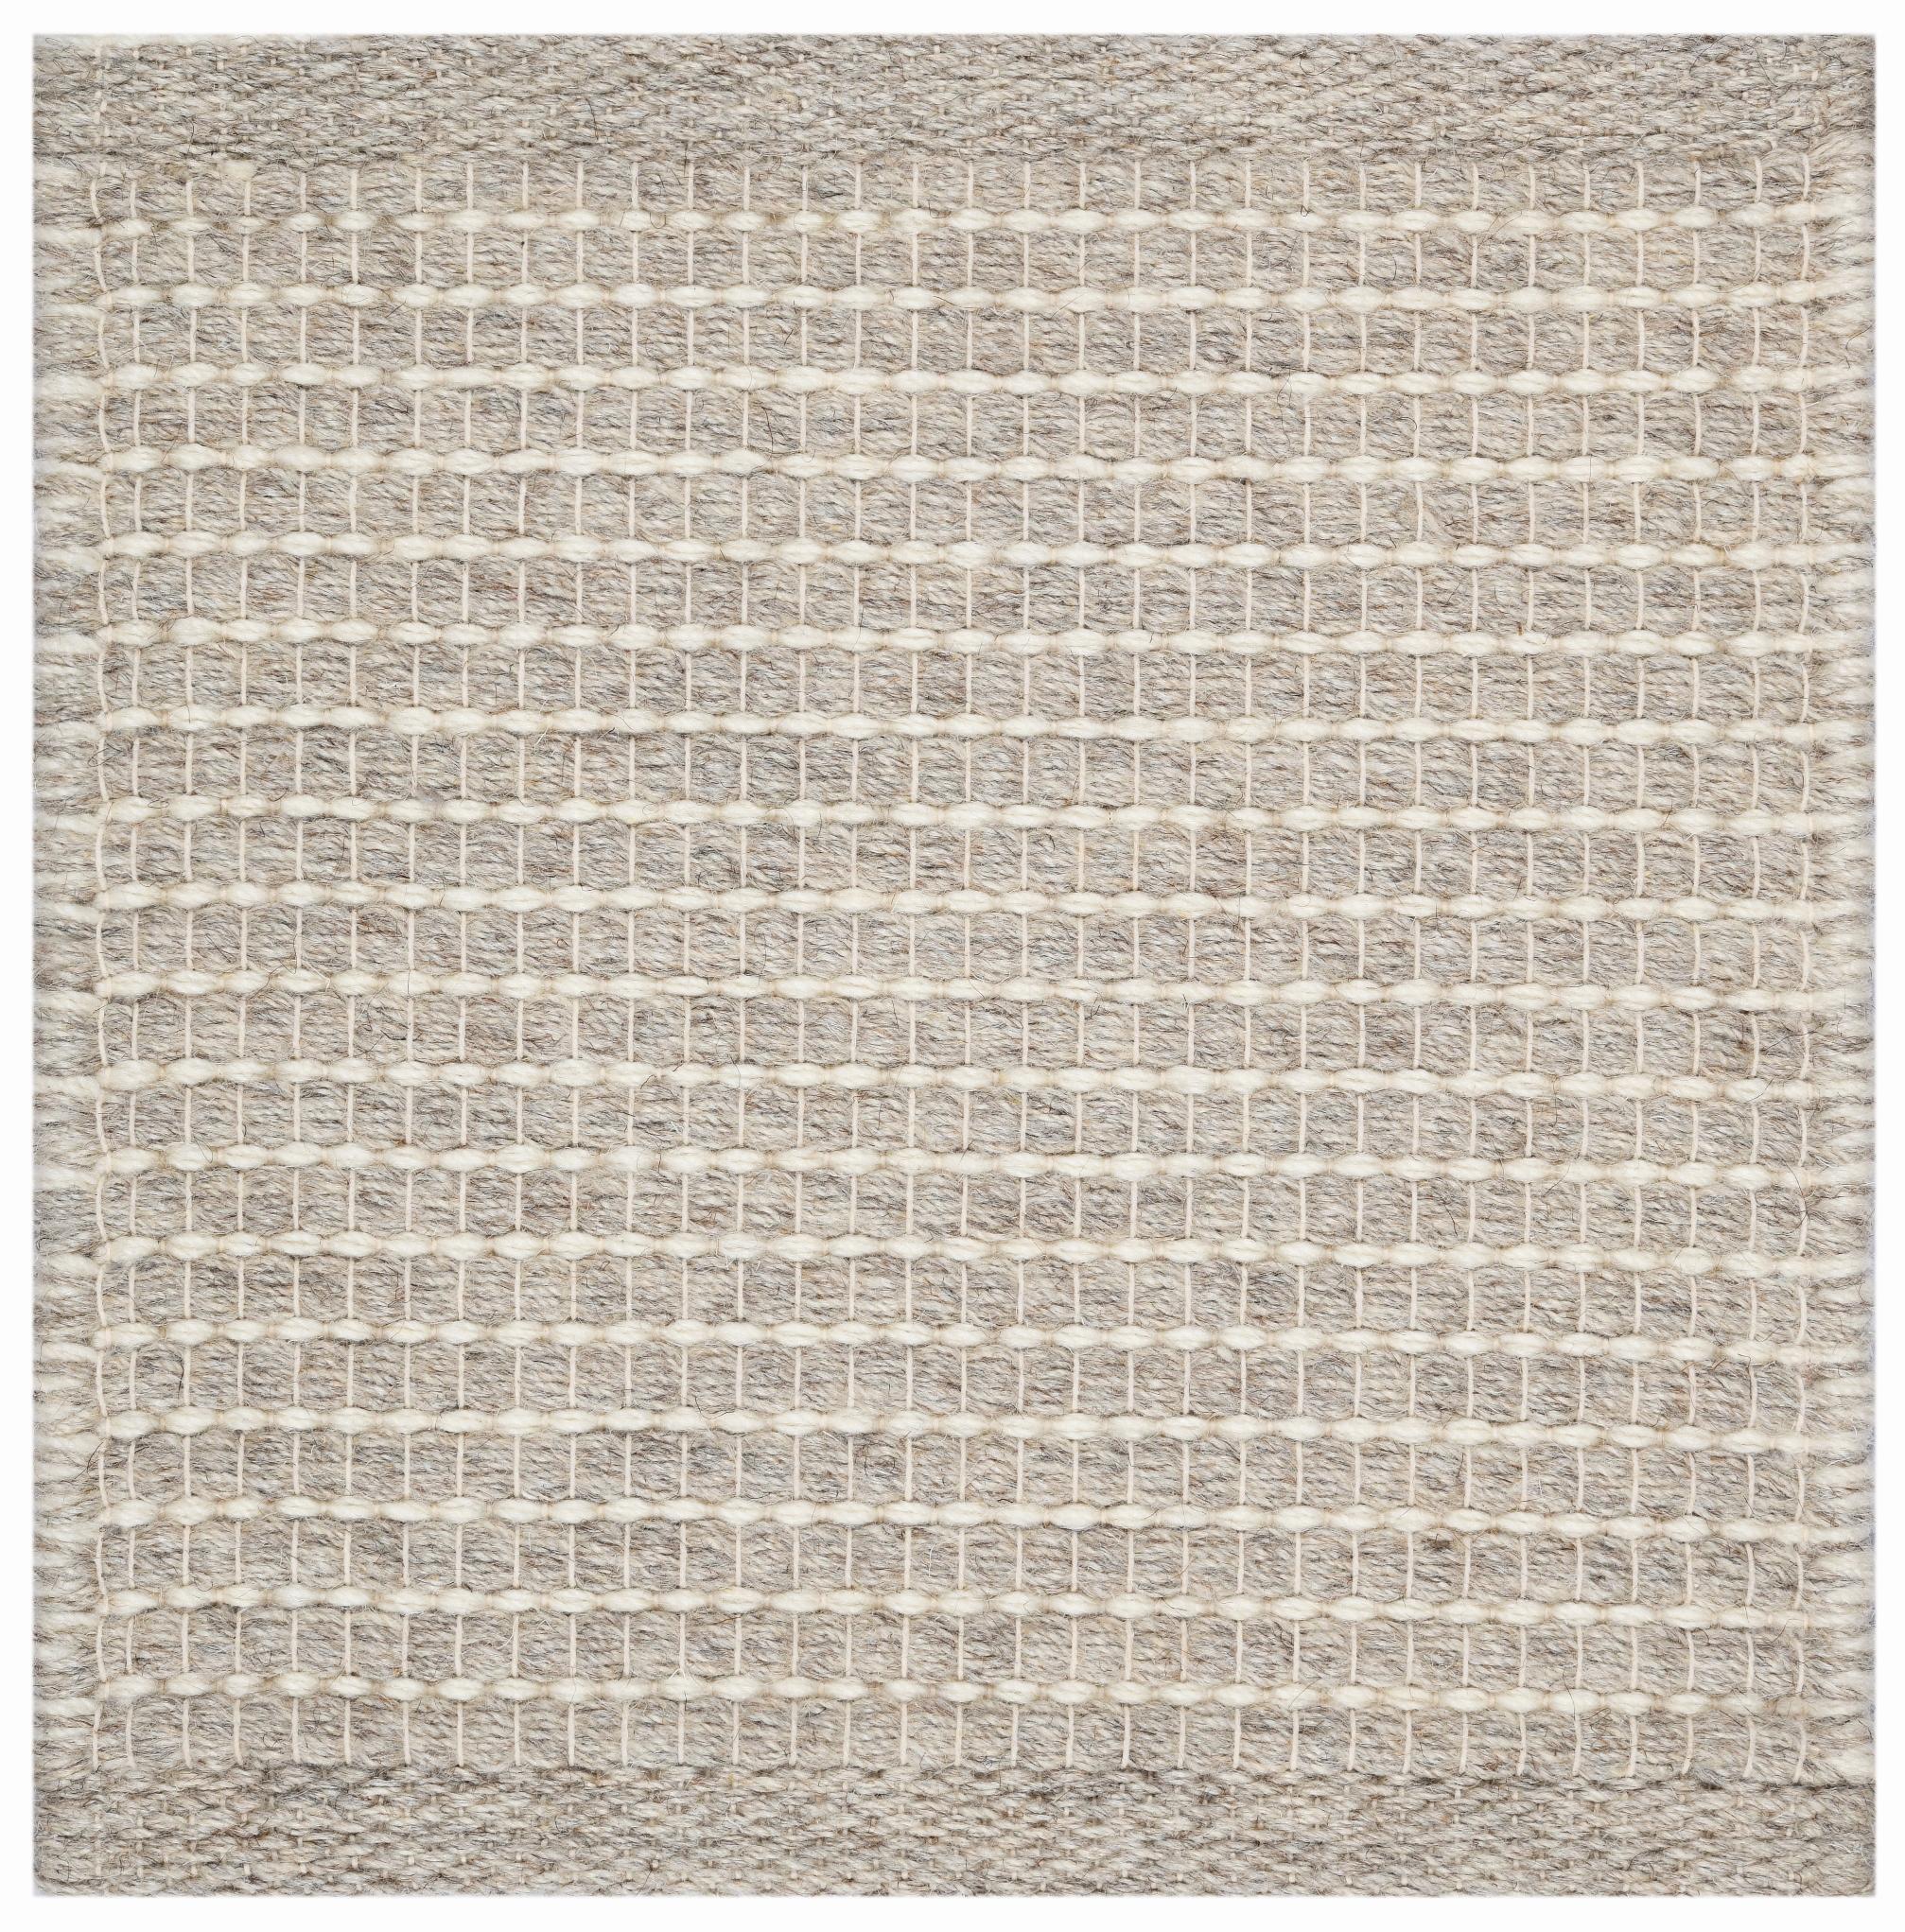 Lex, Ash, Handwoven Face 60% Undyed NZ Wool, 40% Undyed MED Wool, 6' x 9' In New Condition For Sale In New York, NY